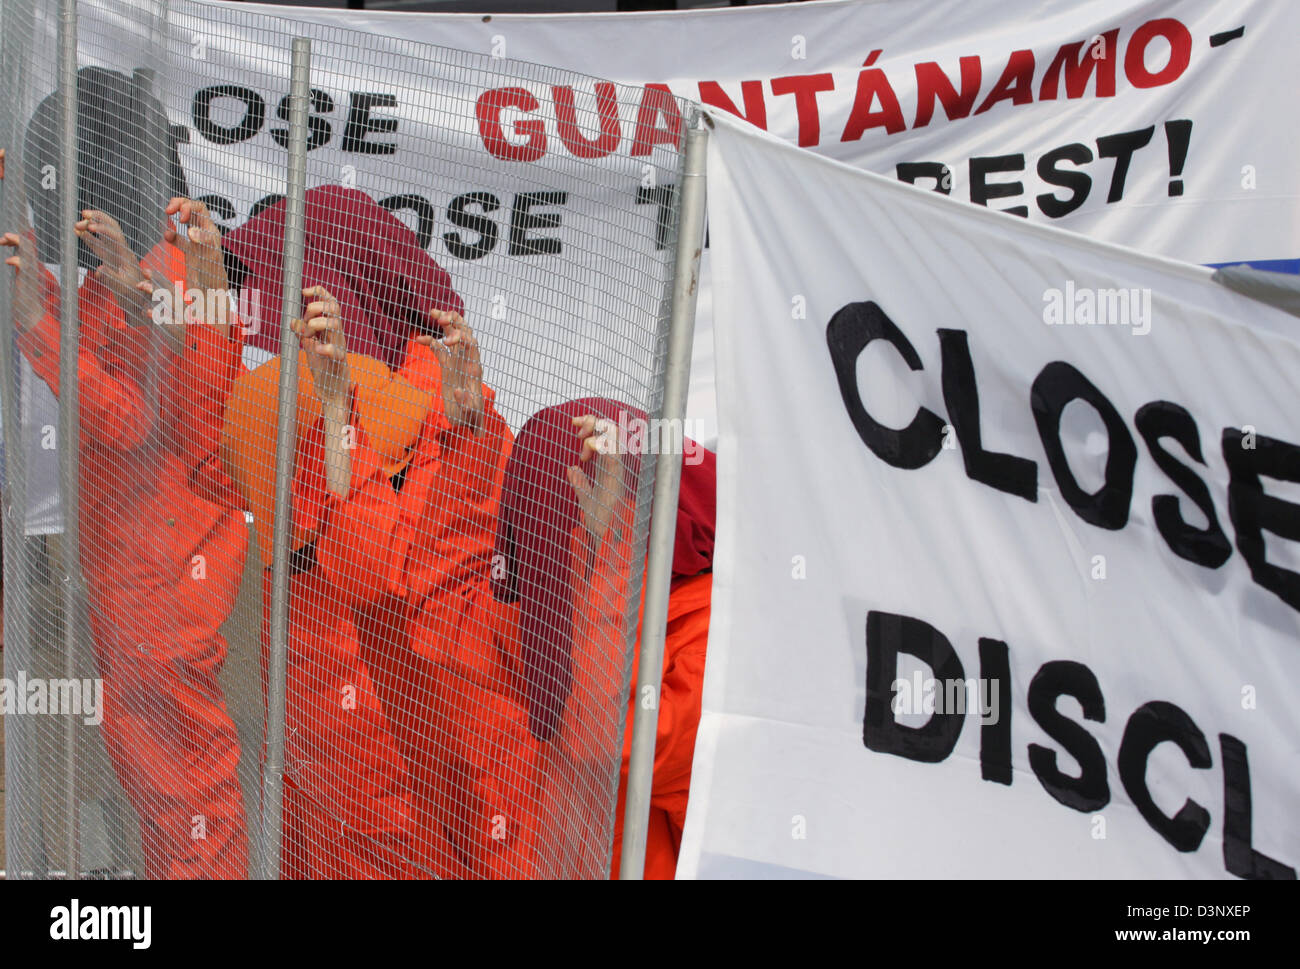 Dressed in symbolic red overalls, members of amnesty international (ai) demonstrate for the shutdown of US-prison camp Guantanamo in front of the US embassy in Berlin, Germany, Wednesday 12 July 2006. The demonstrators put up signs reading 'Close Guantanmo. Disclose the Rest!'. ai also demands an inspection of human rights abuse. Photo: Soeren Stache Stock Photo